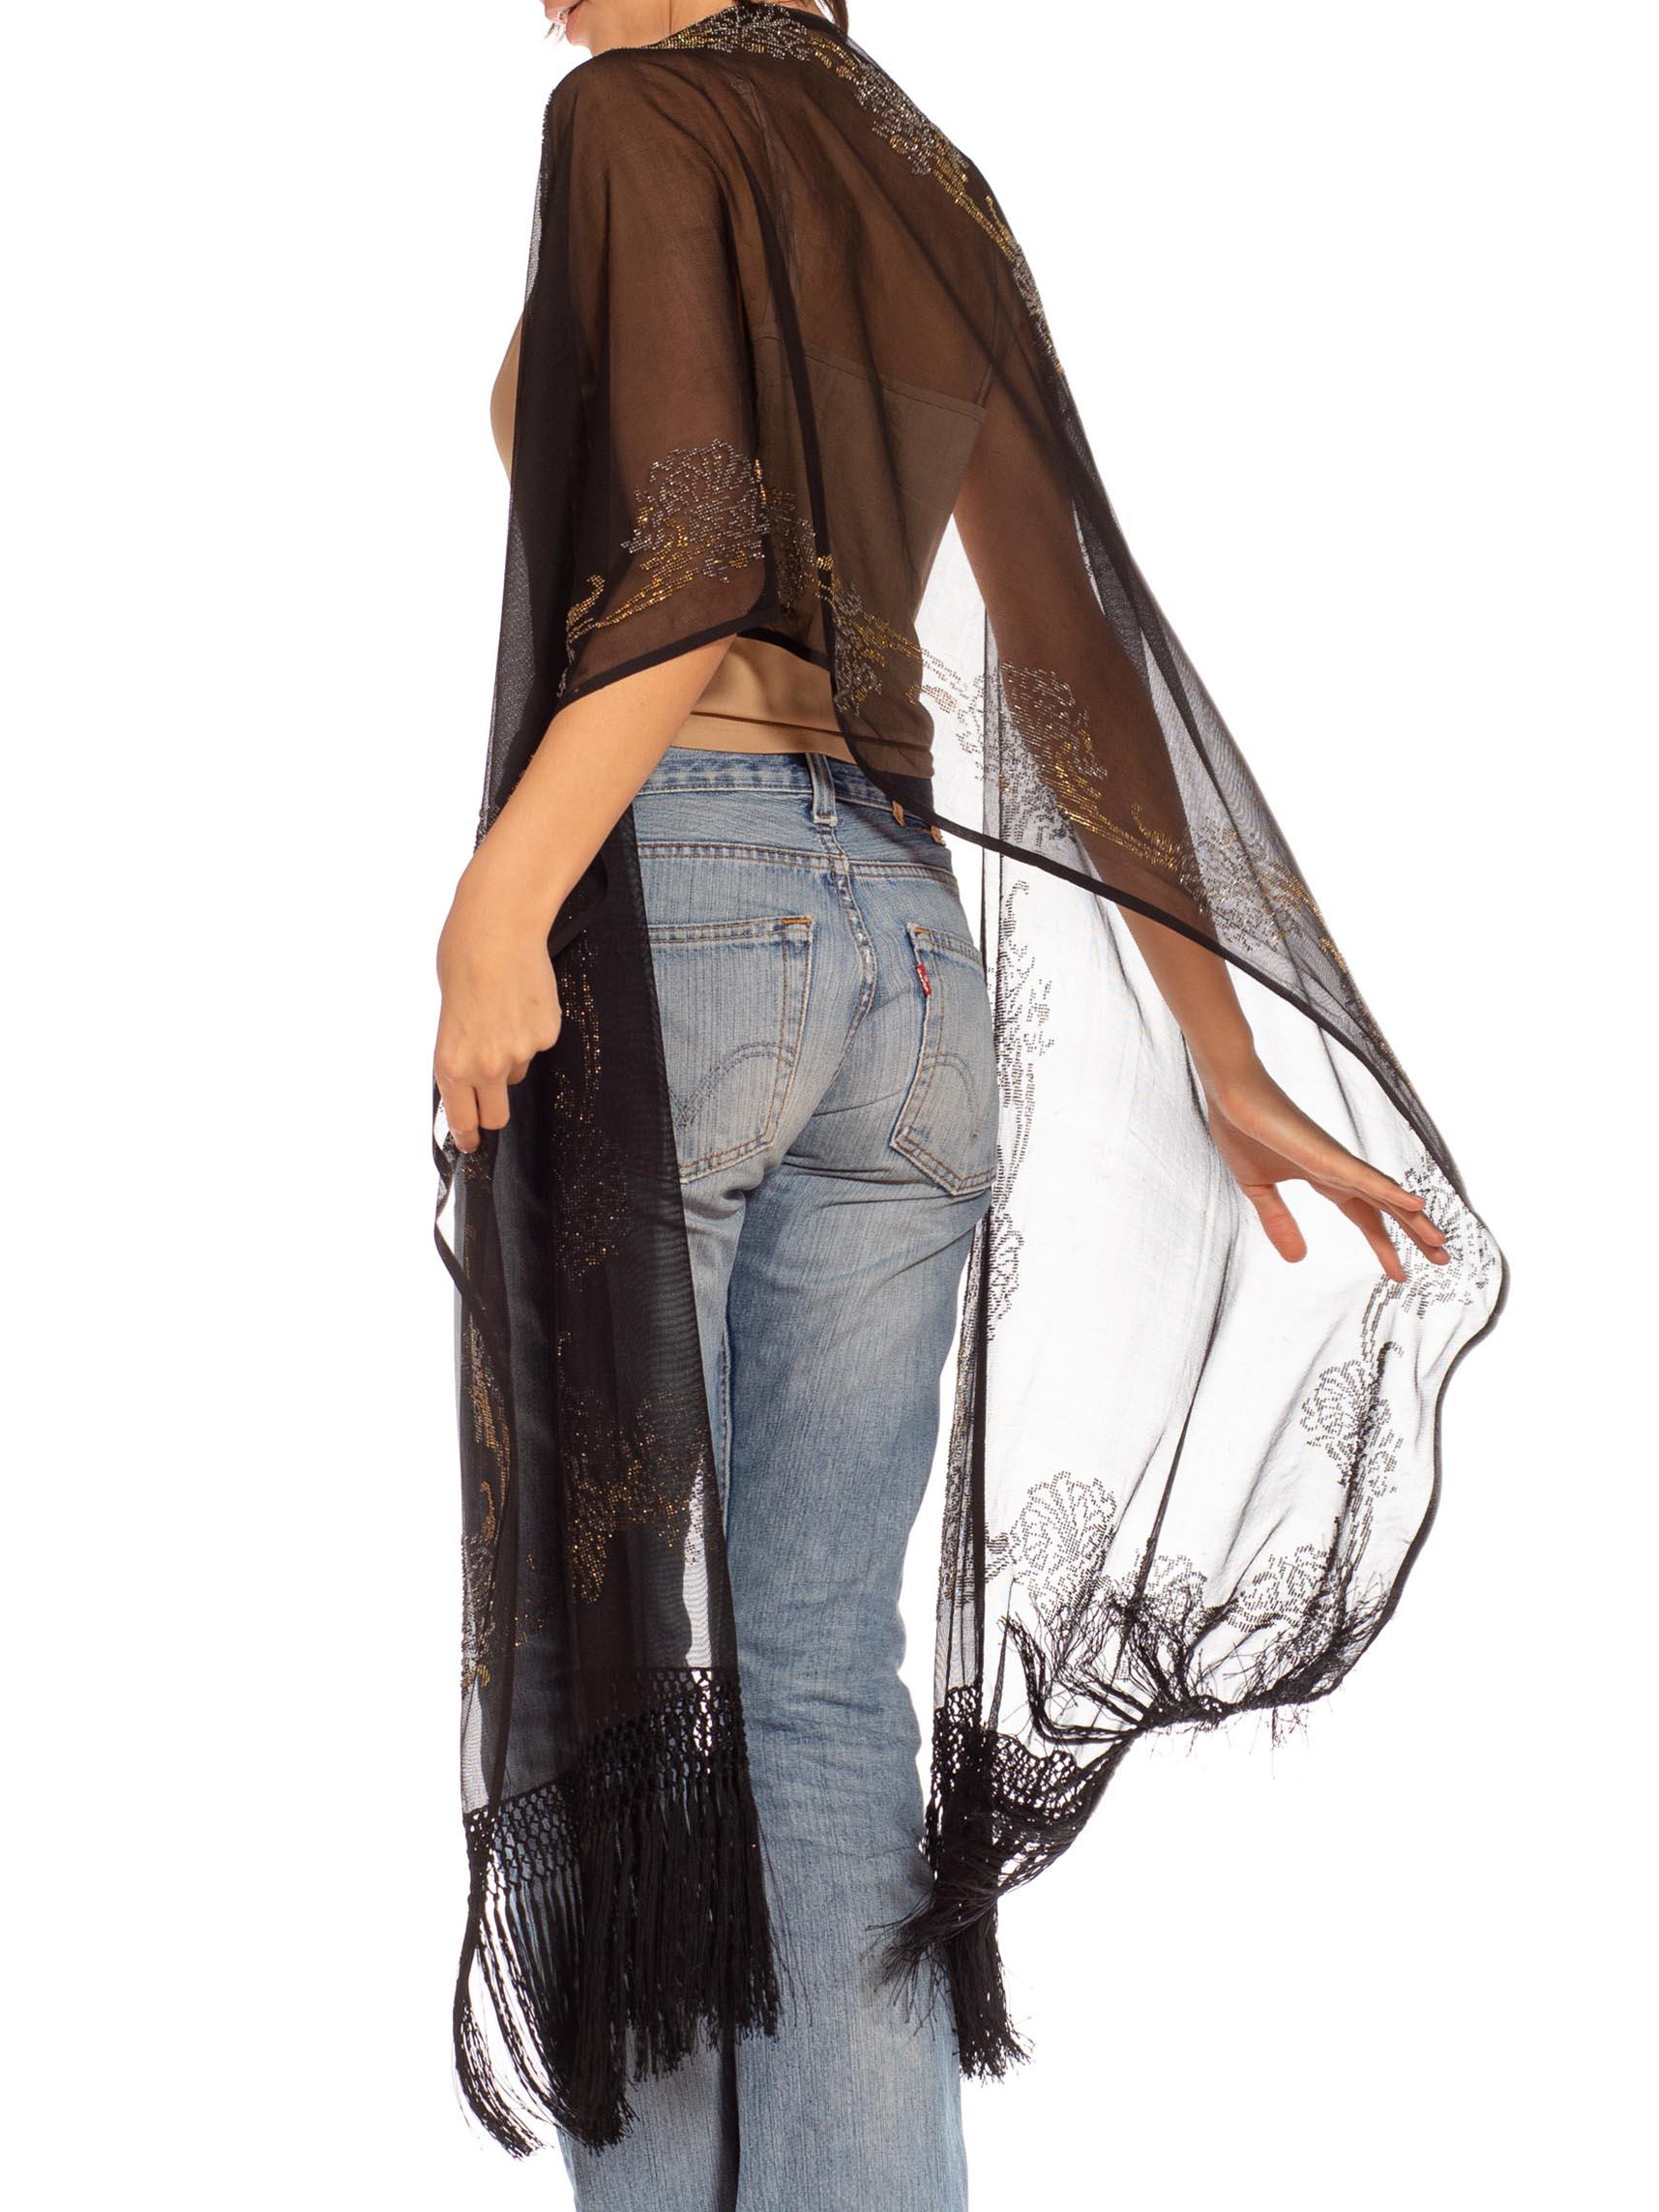 Victorian Black & Gold Silk Shawl With Beads Woven Into Fabric 2